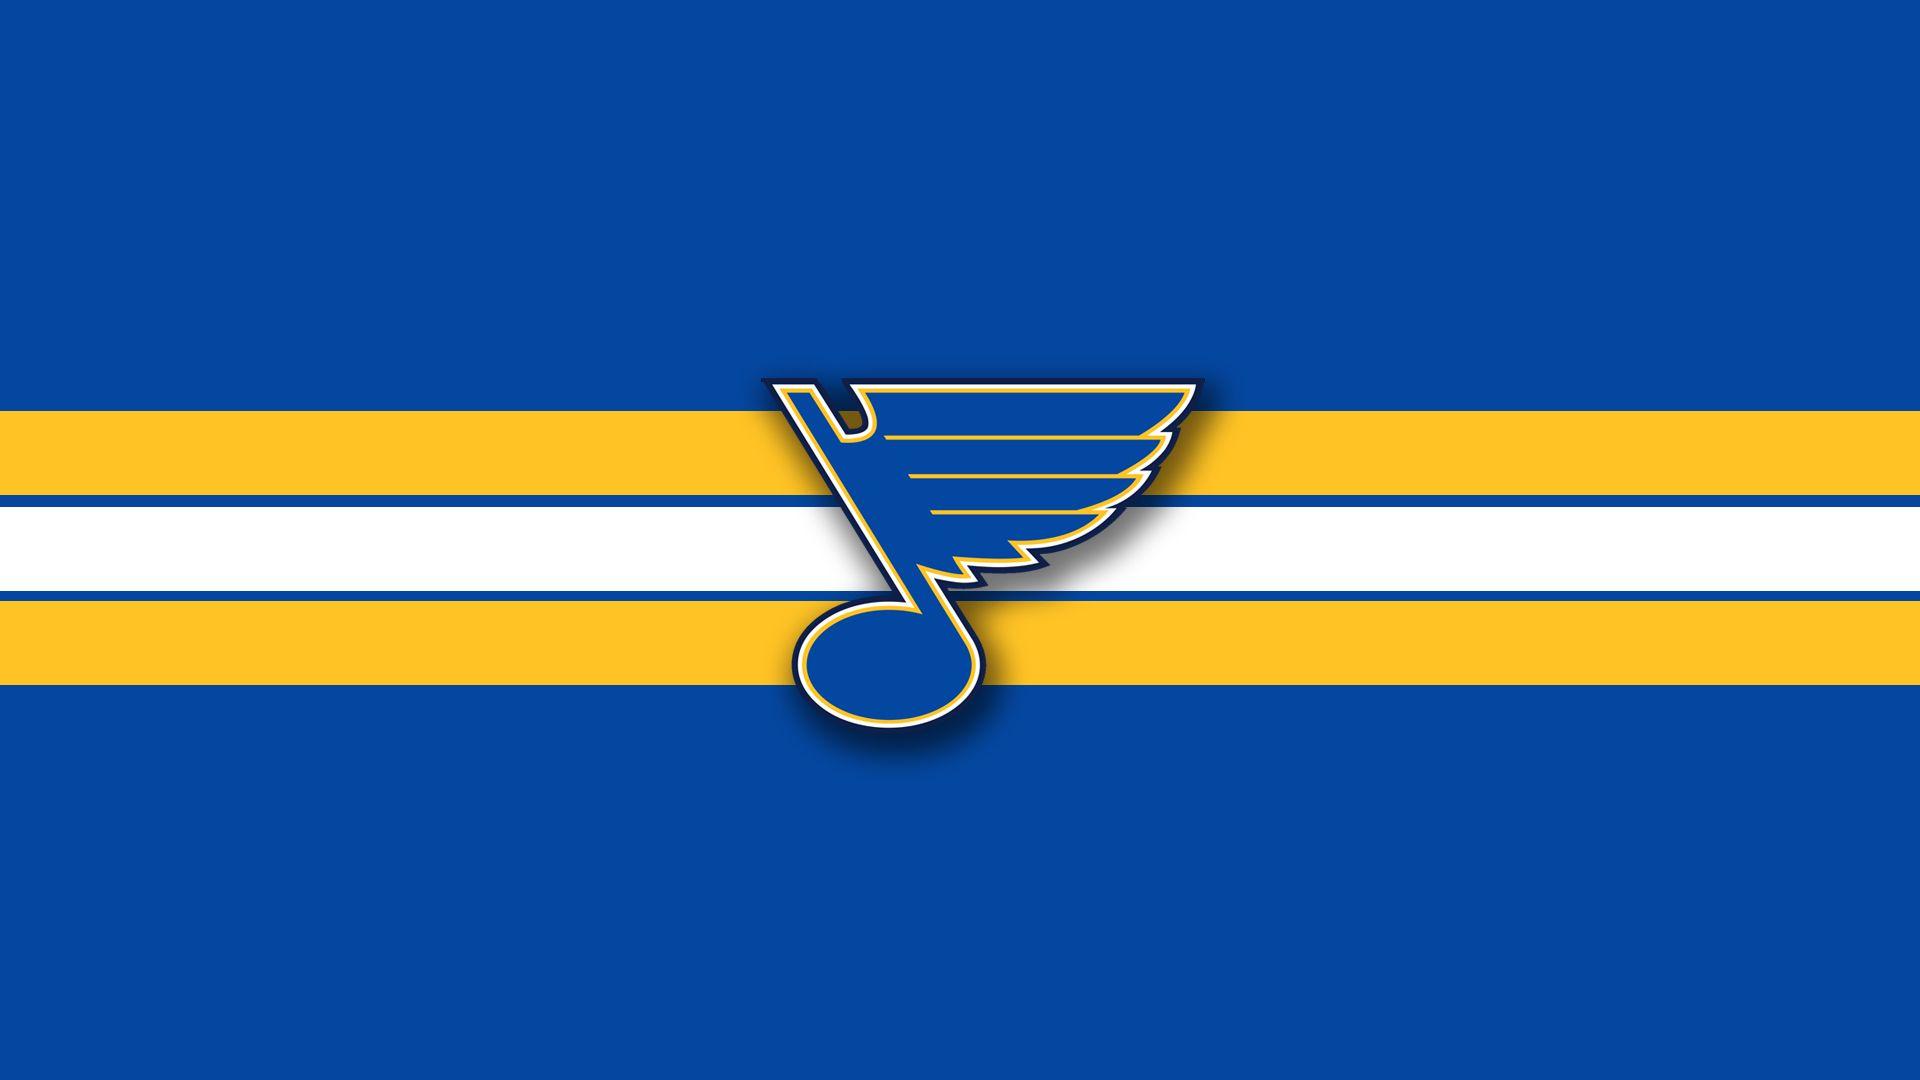 STL Blues Logo - Reasons It's Acceptable to Hate the St. Louis Blues